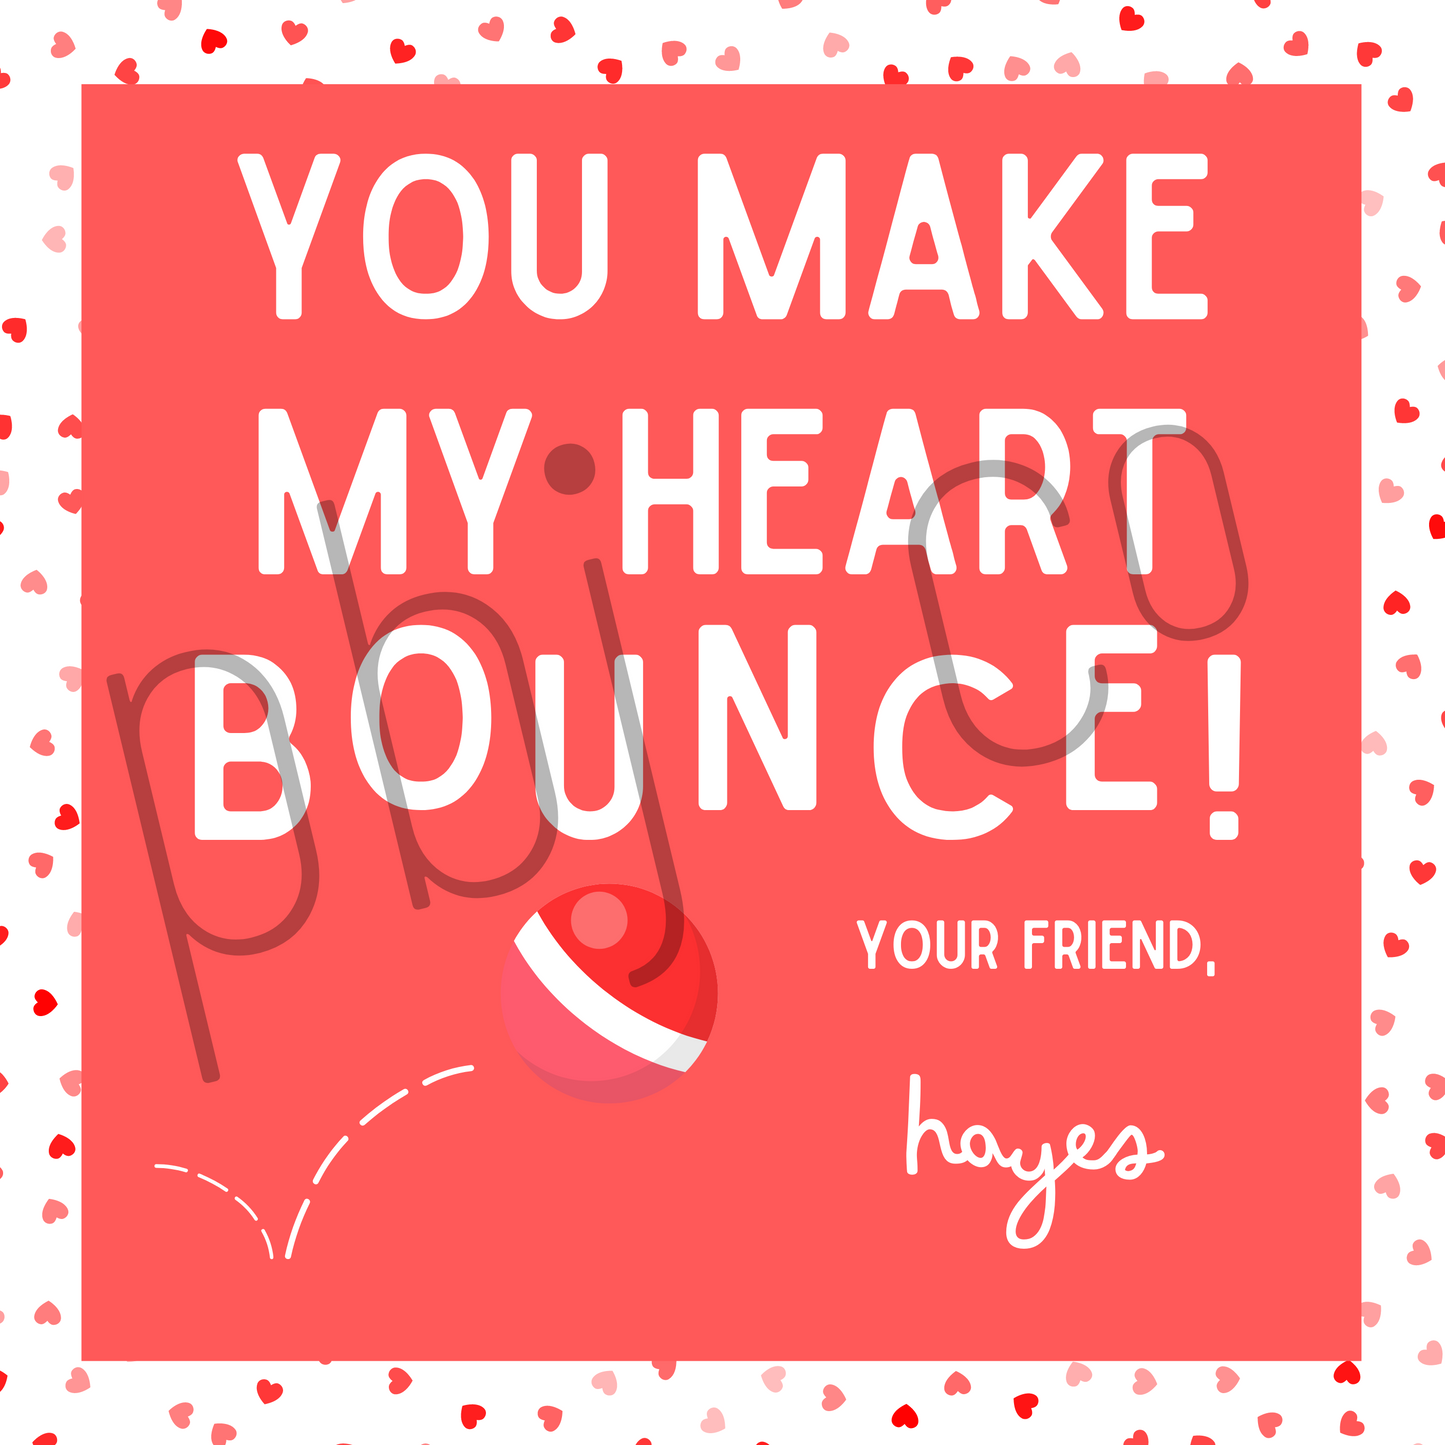 PRINTED Kids Customized Bouncy Ball Valentine's Day Set of 24 Cards Favors Boy Girl Valentines Gift Tag With Envelopes Classroom Daycare Teacher